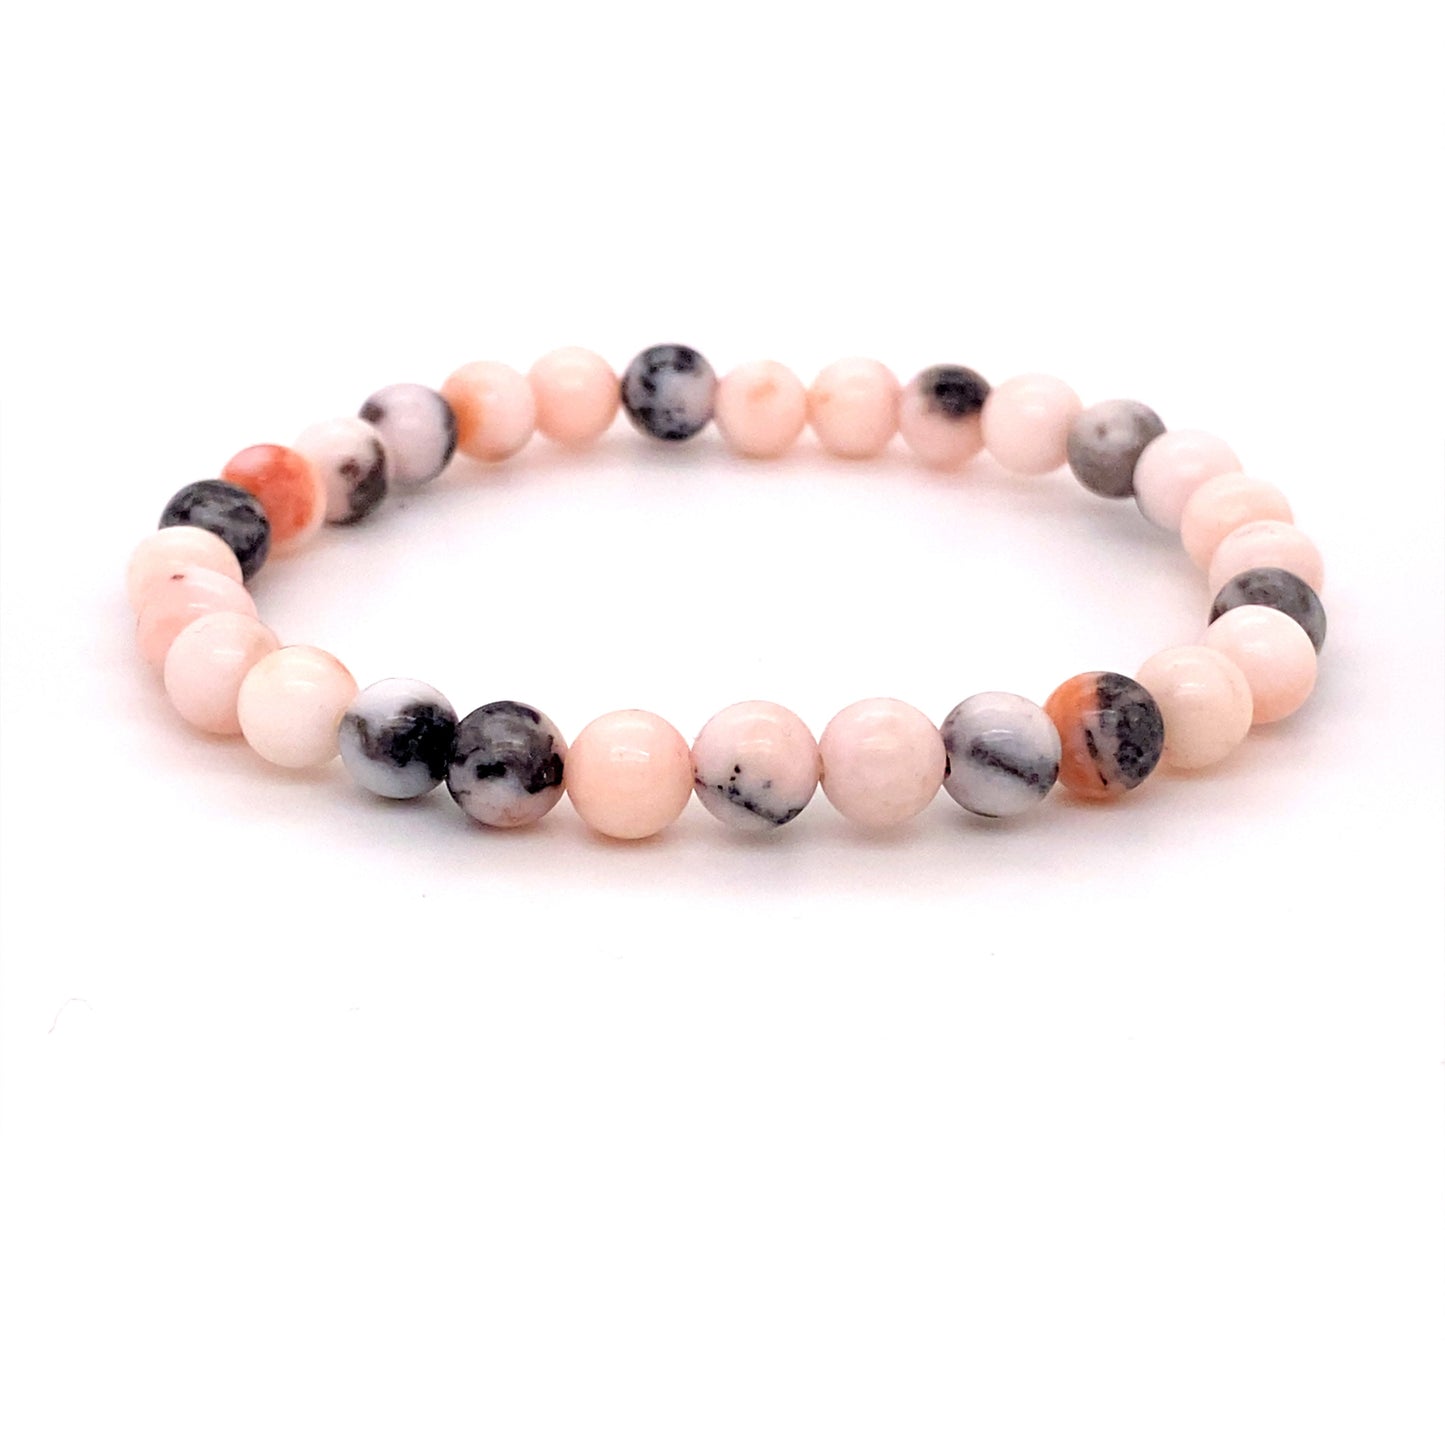 
                  
                    A 4mm Beaded Stone Bracelets made of alternating pink and black marbled beads, featuring Red Agate and Rose Quartz on a plain white background.
                  
                